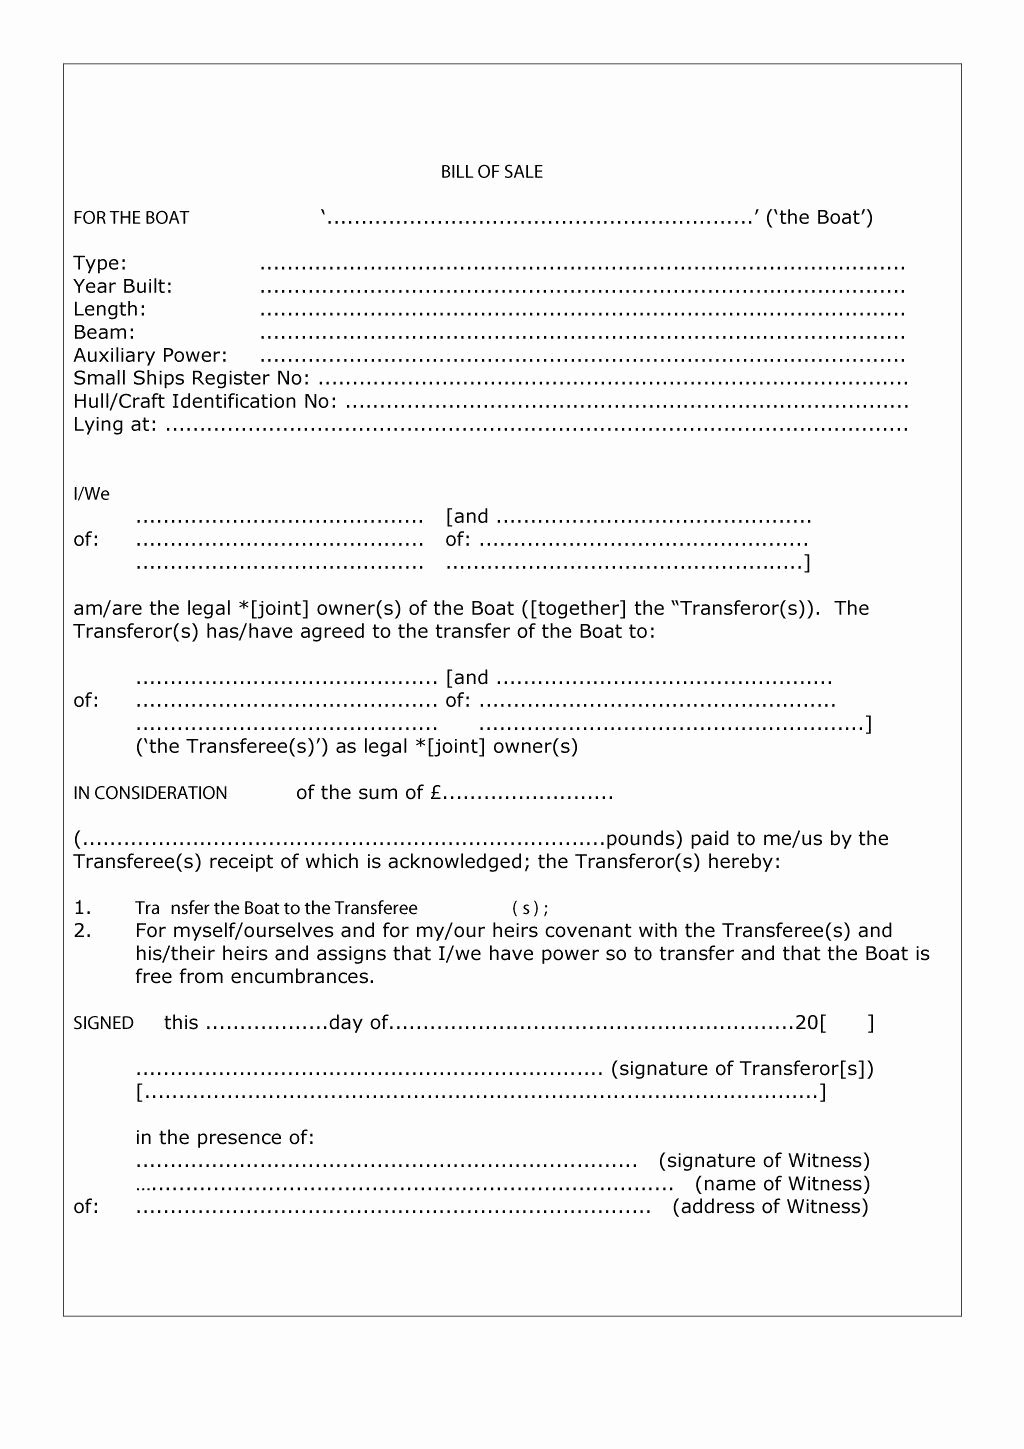 Bill Of Sale Template Free Best Of 46 Fee Printable Bill Of Sale Templates Car Boat Gun